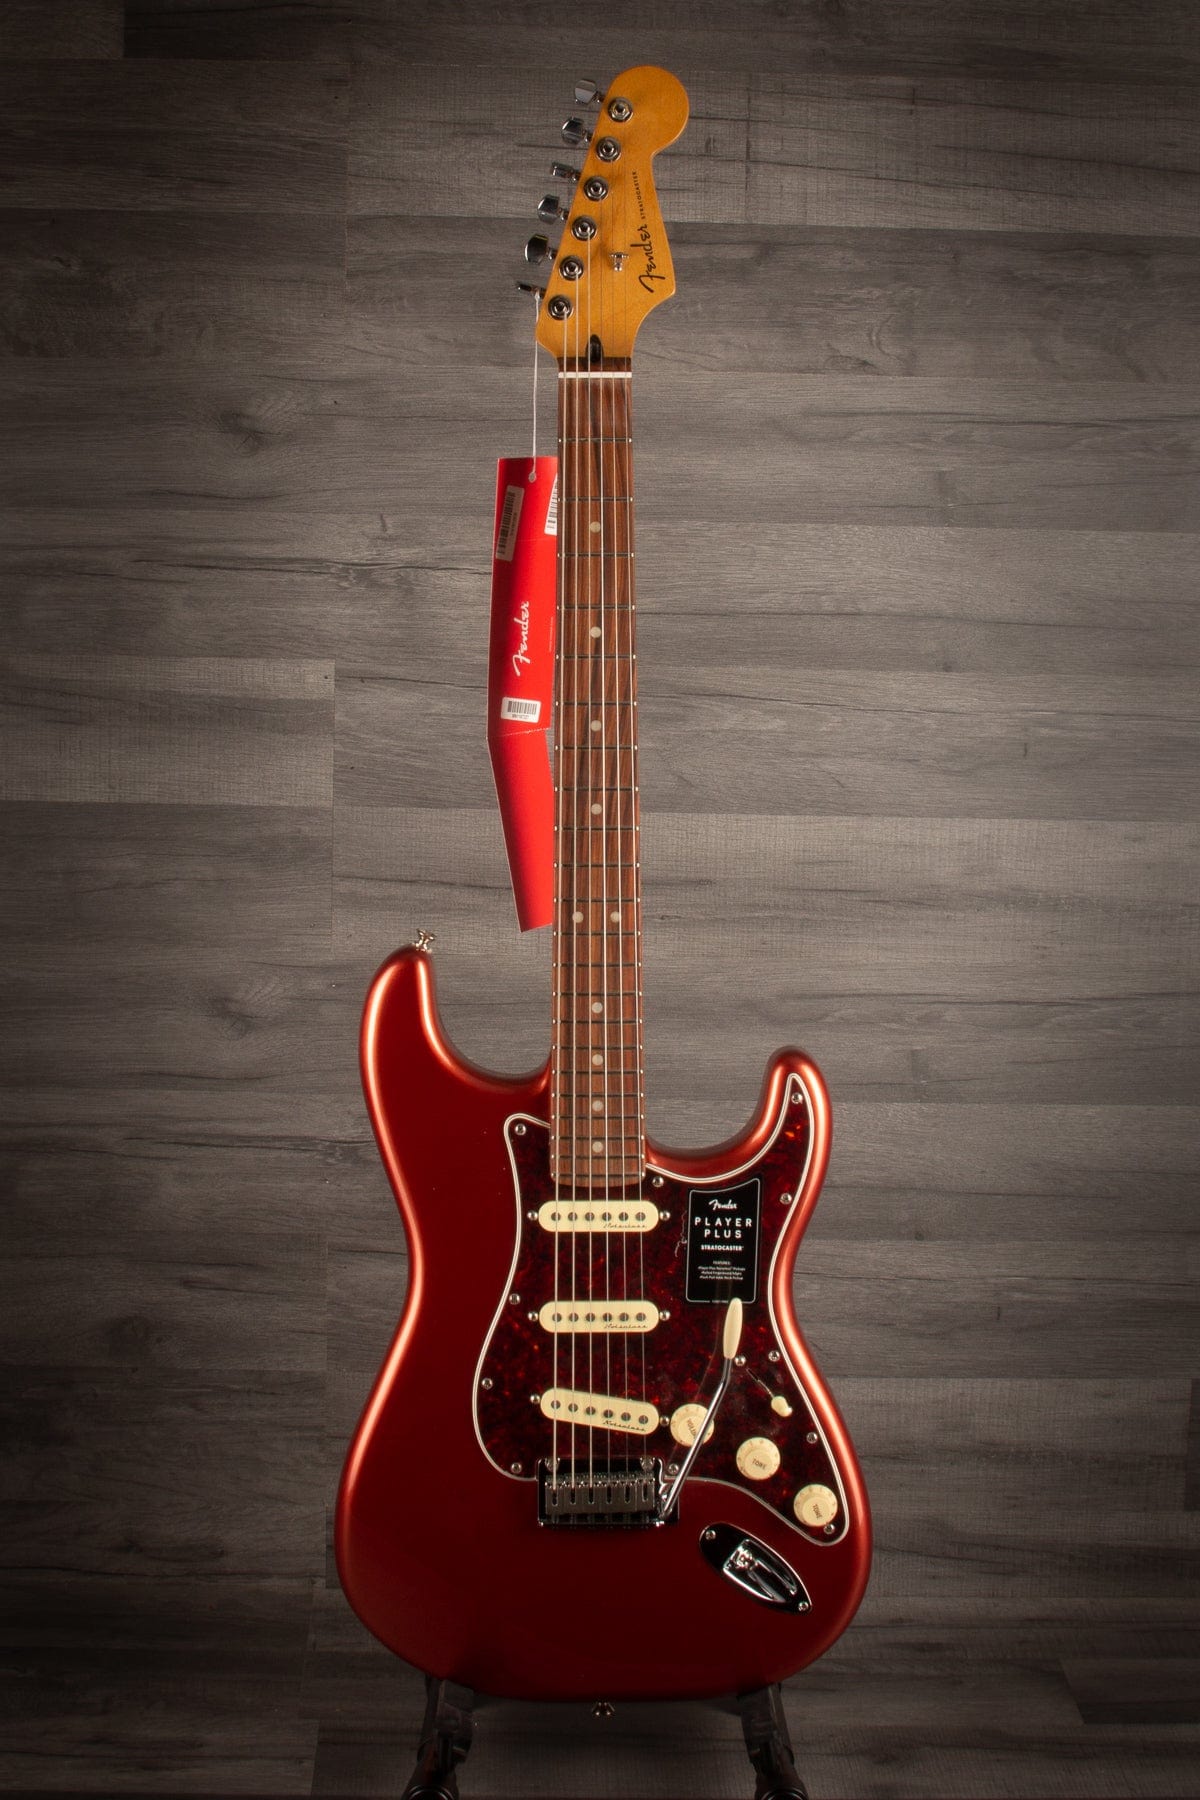 Candy　Red　Plus　Stratocaster　Musicstreet　Aged　Apple　Fender　Player